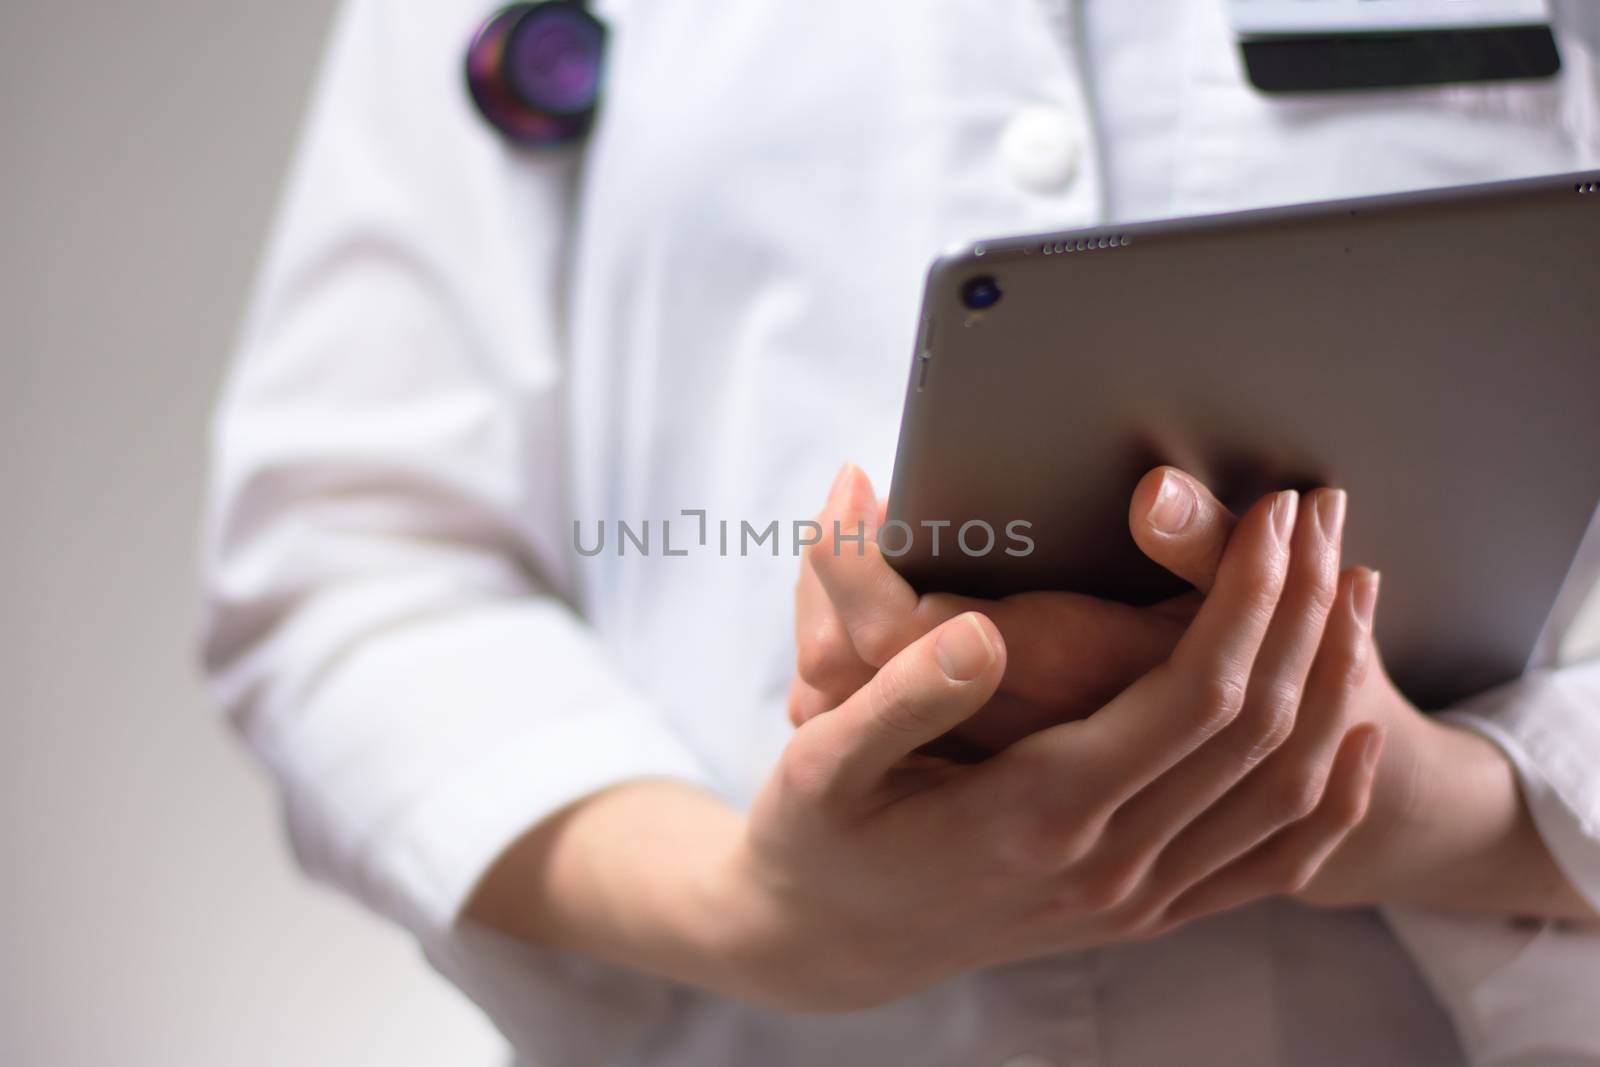 Tablet in the hands of healthcare professional up close. White coat, stethoscope, and badge visible in background. Hands of nurse practitioner or PA using technology in medicine for patients by jmac23